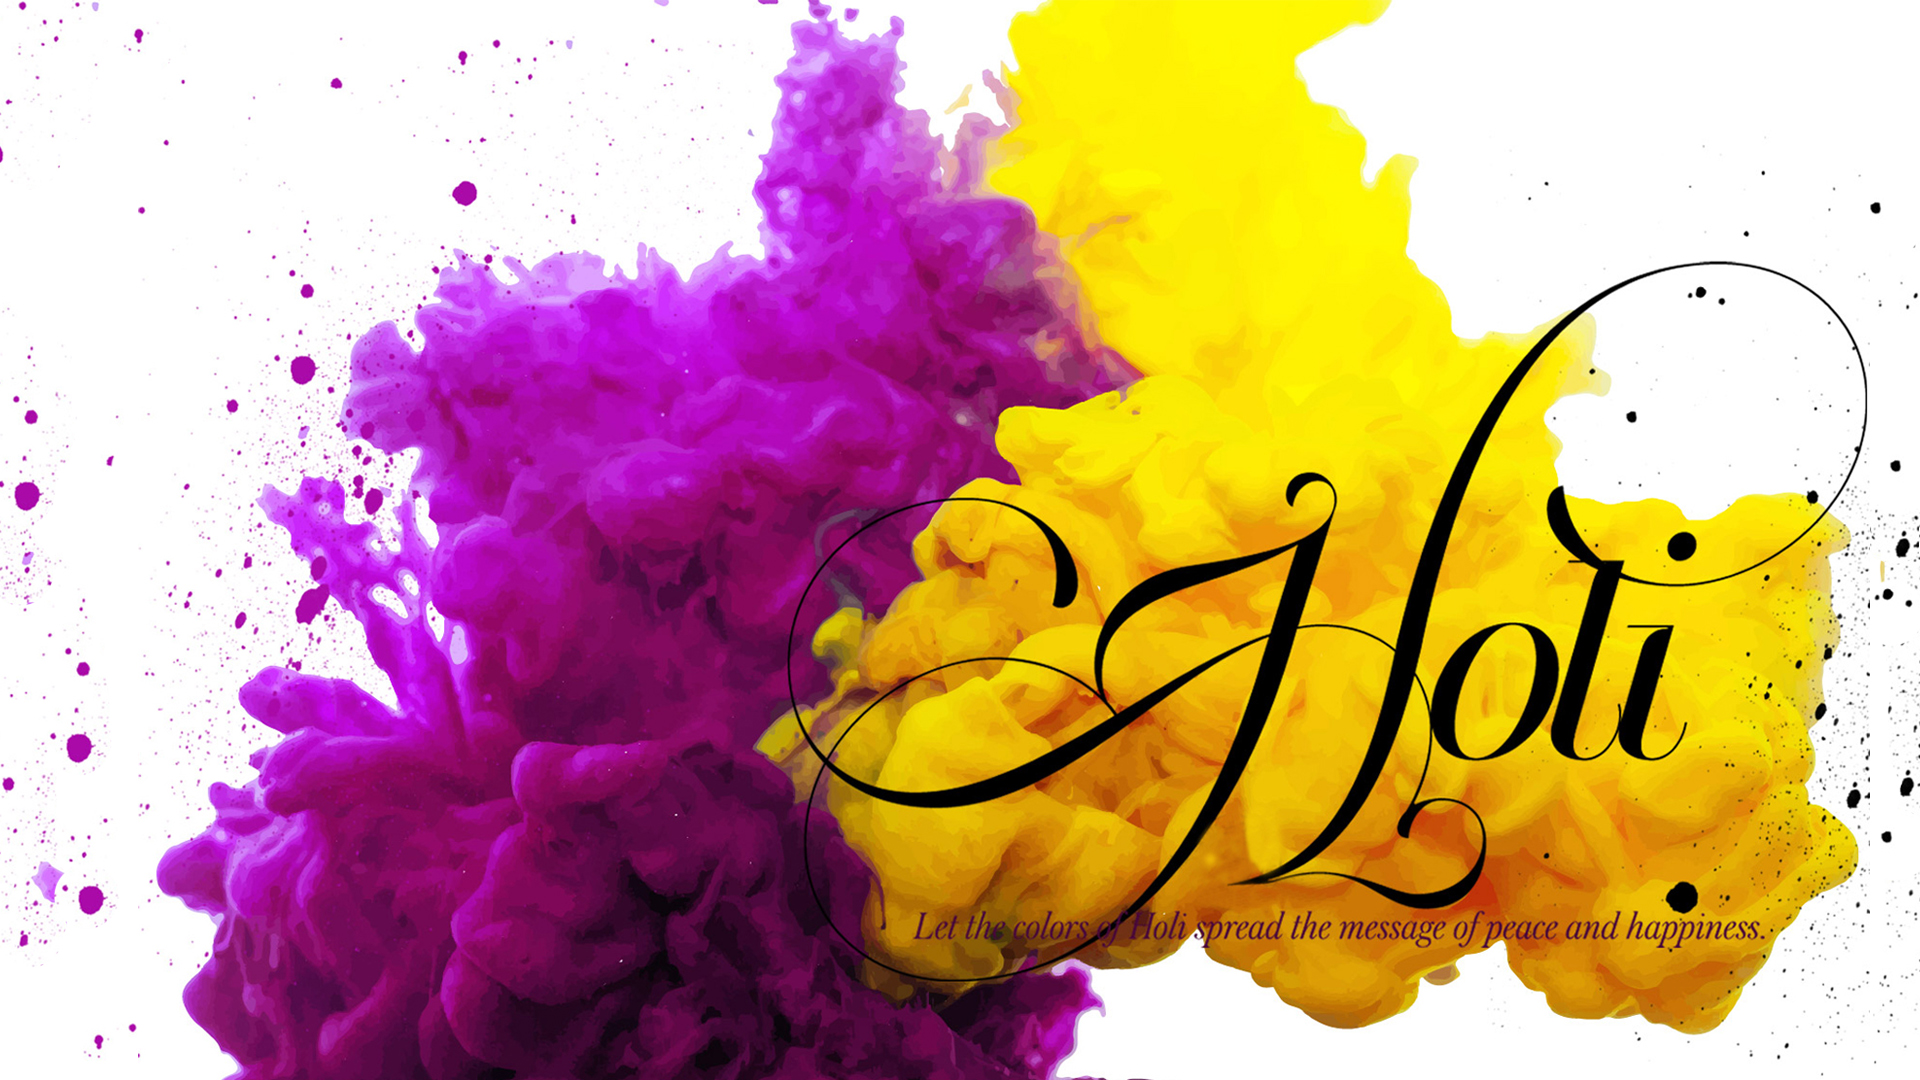 HD Holi Wallpaper with Yellow and Purple Color Wallpaper